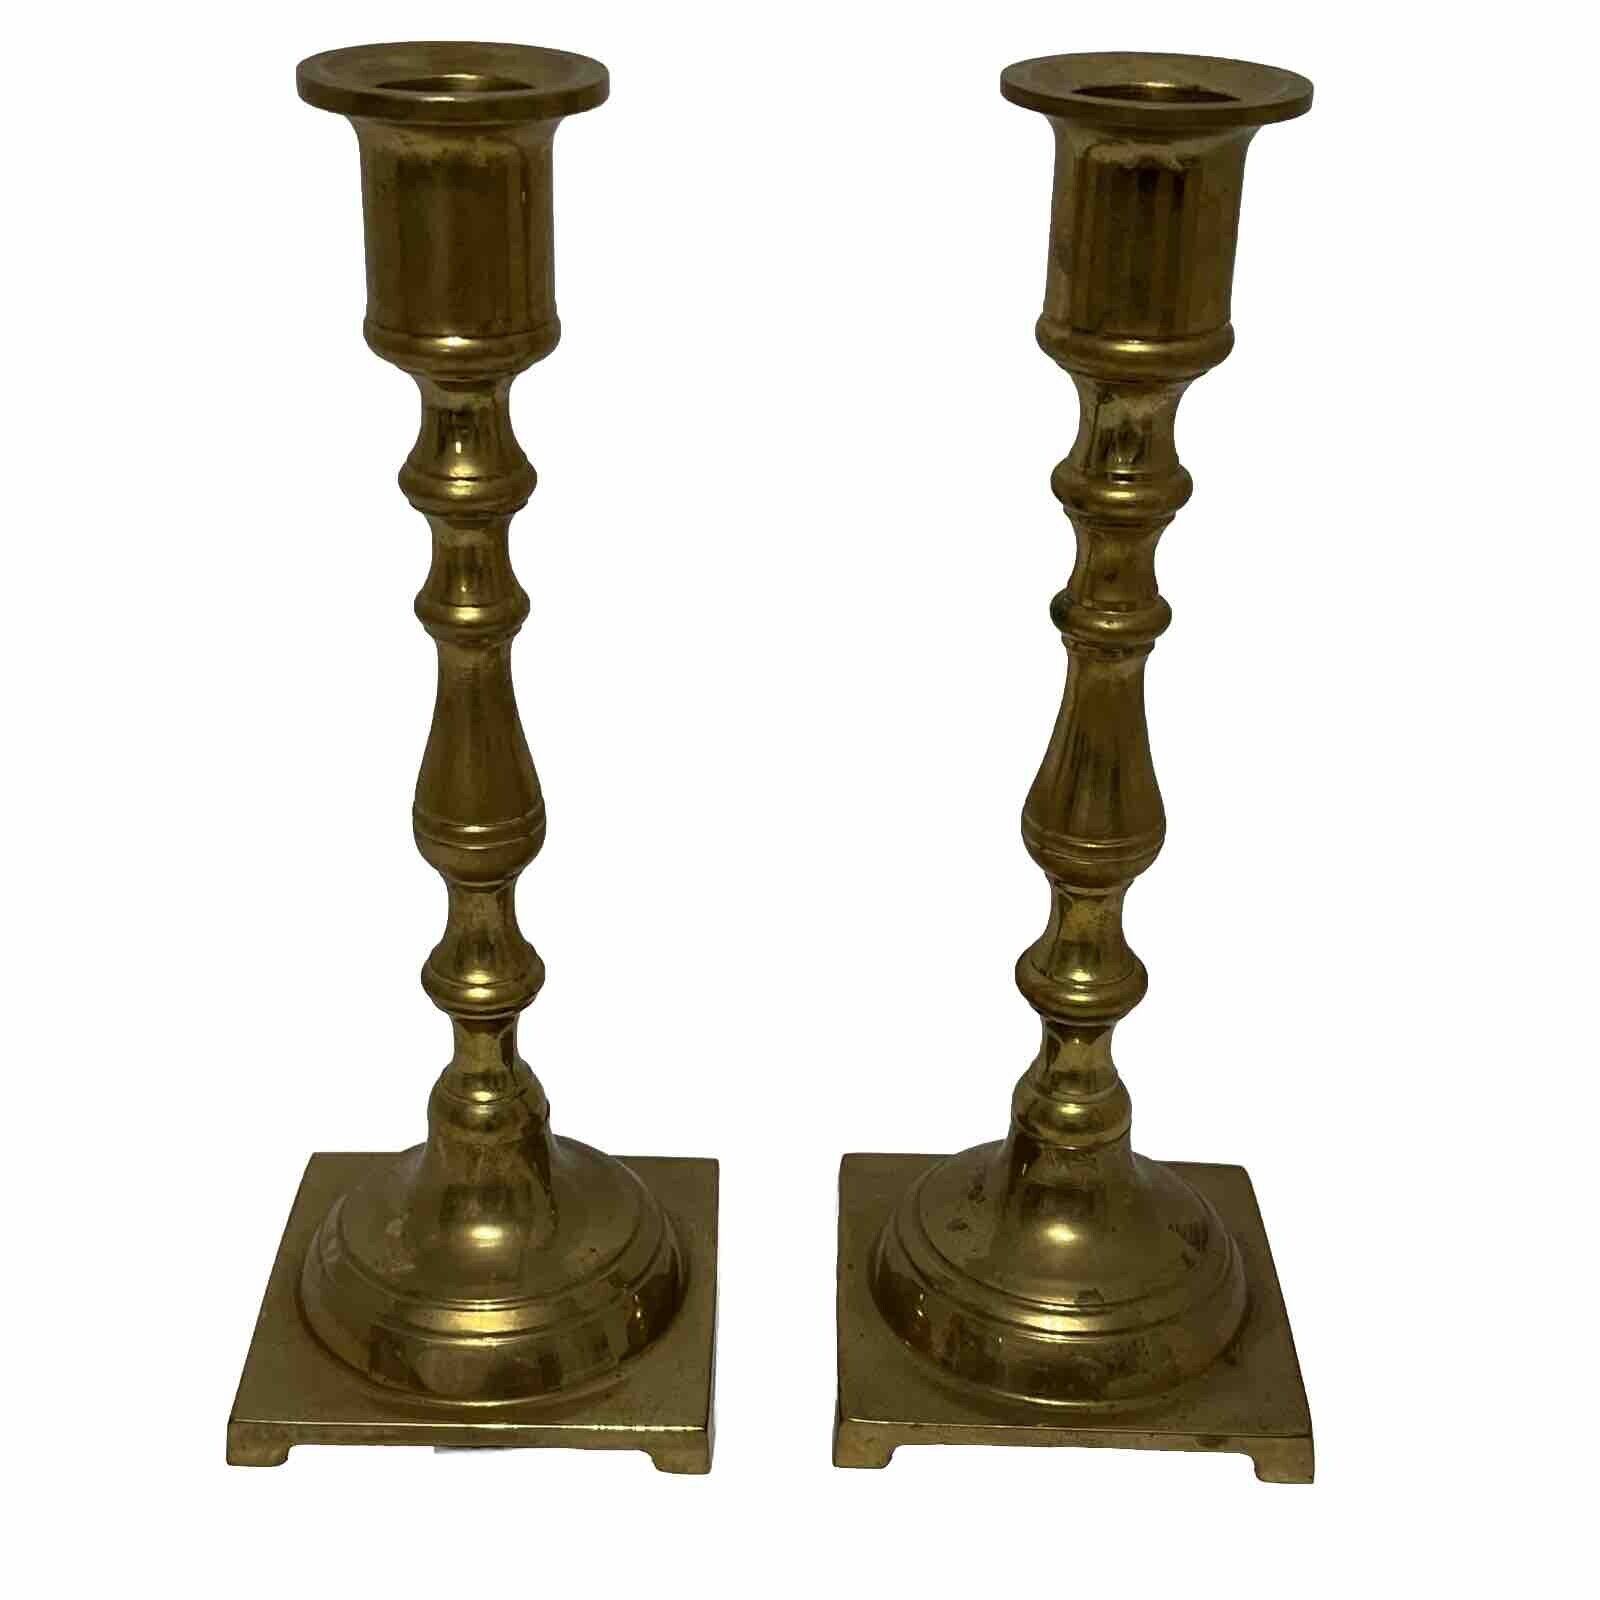 Pair Solid Brass Candlesticks Candle Holders 7.5” MCM Style